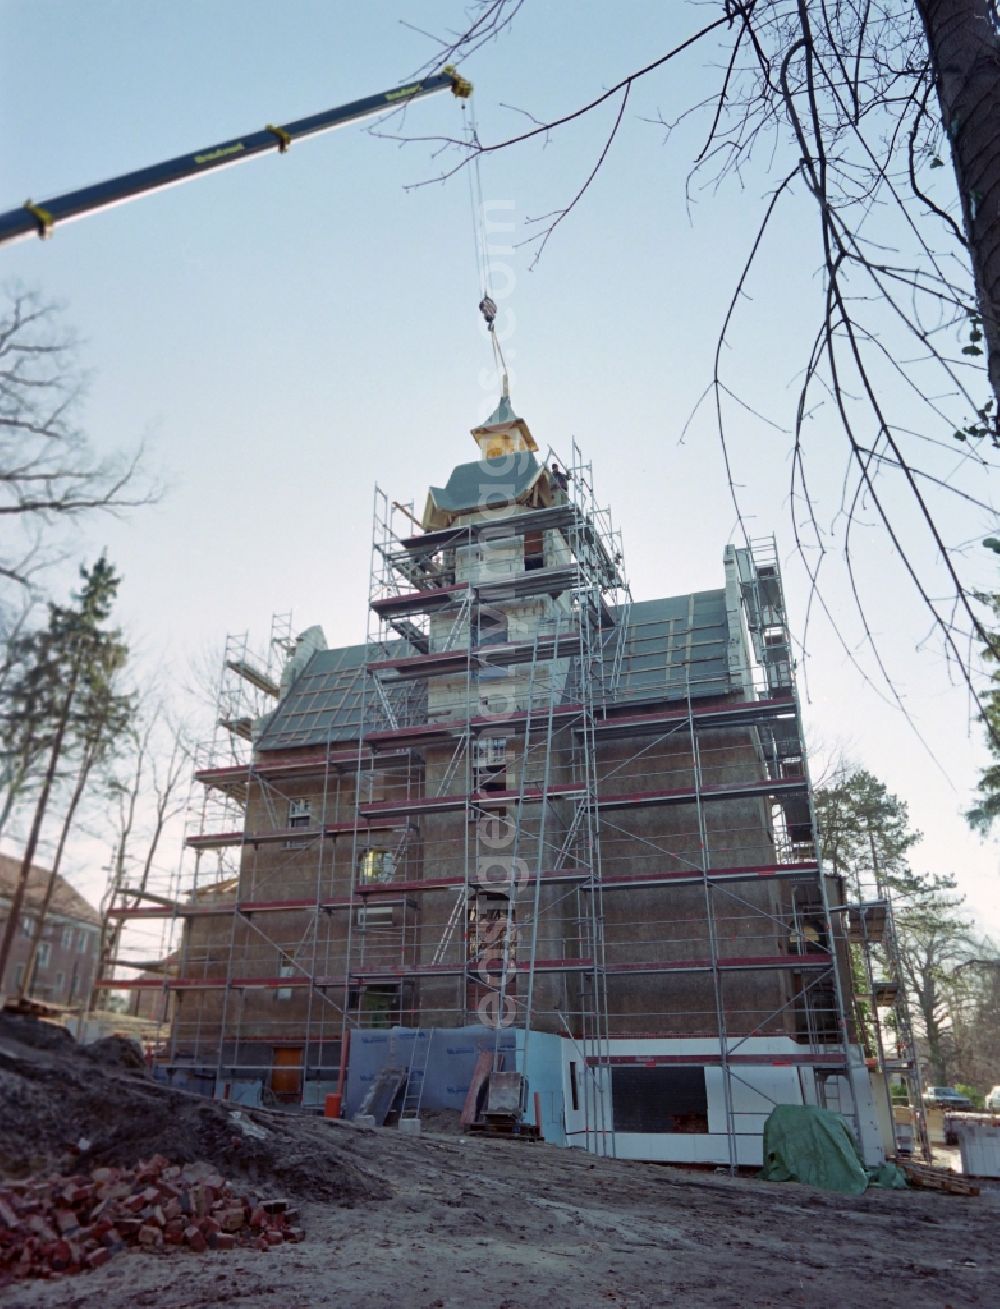 GDR picture archive: Potsdam - Renovation work for restoration and modernization on the construction site a villa in street Spitzweggasse in the district Babelsberg in Potsdam in the state Brandenburg on the territory of the former GDR, German Democratic Republic